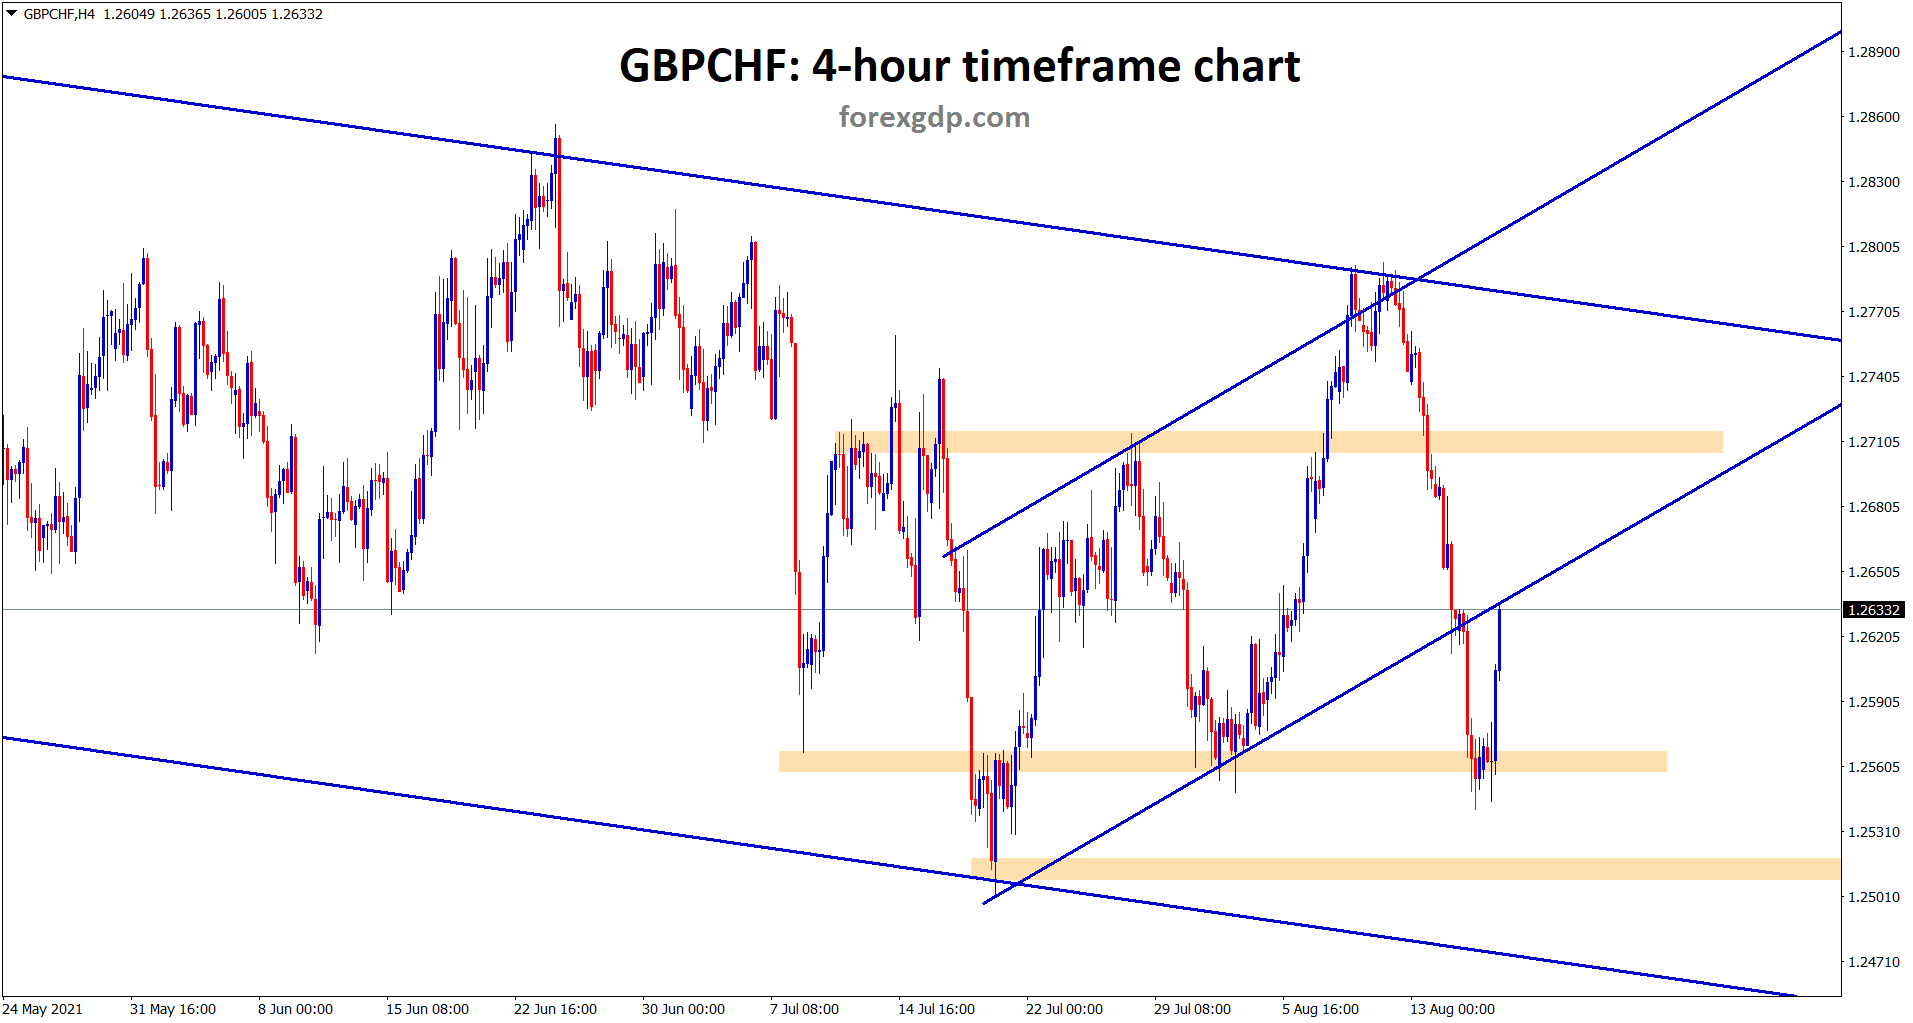 GBPCHF rebound from the support and retesting the previous broken ascending channel